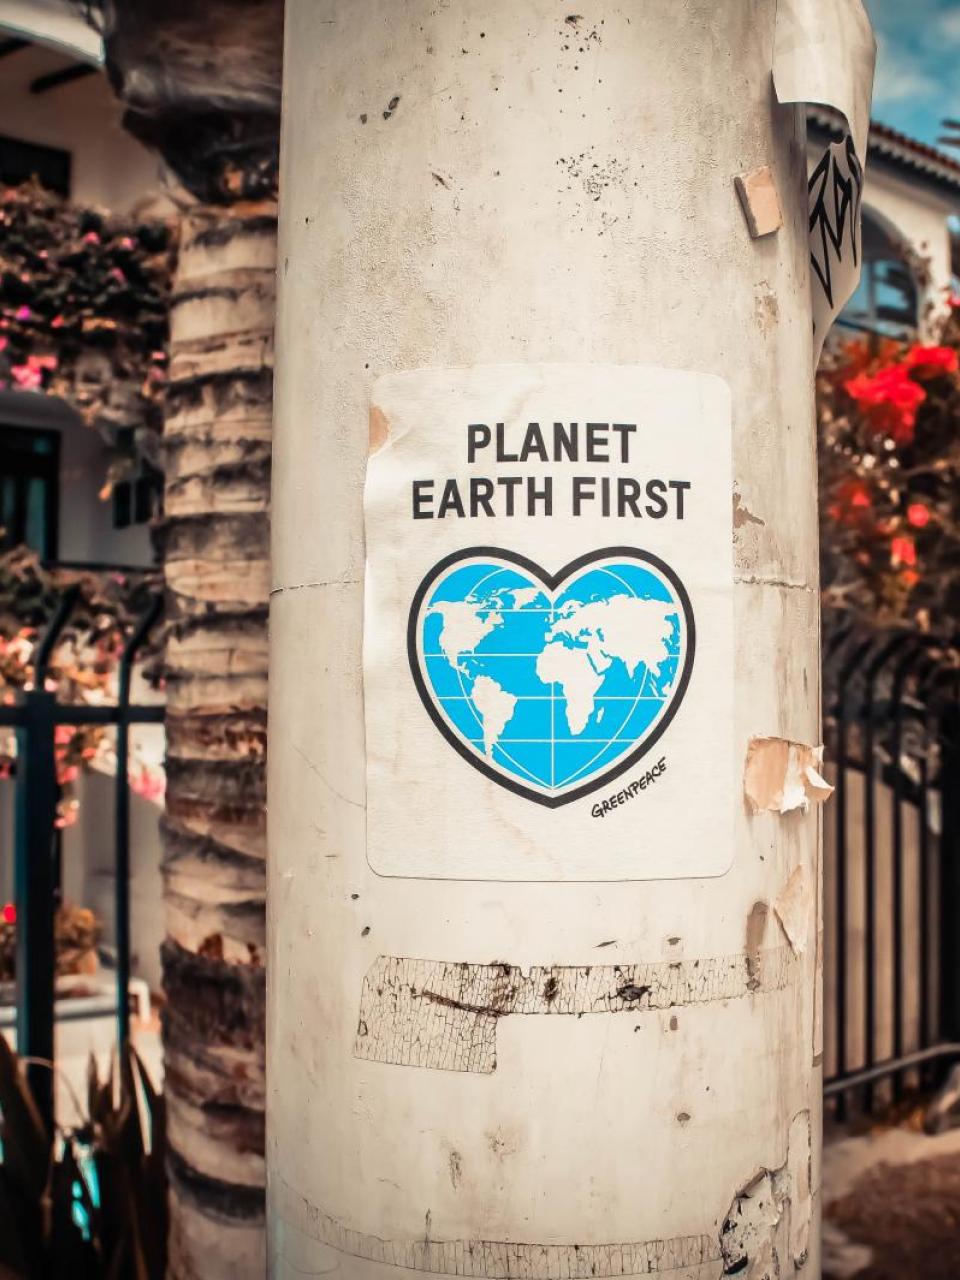 "Planet earth first"